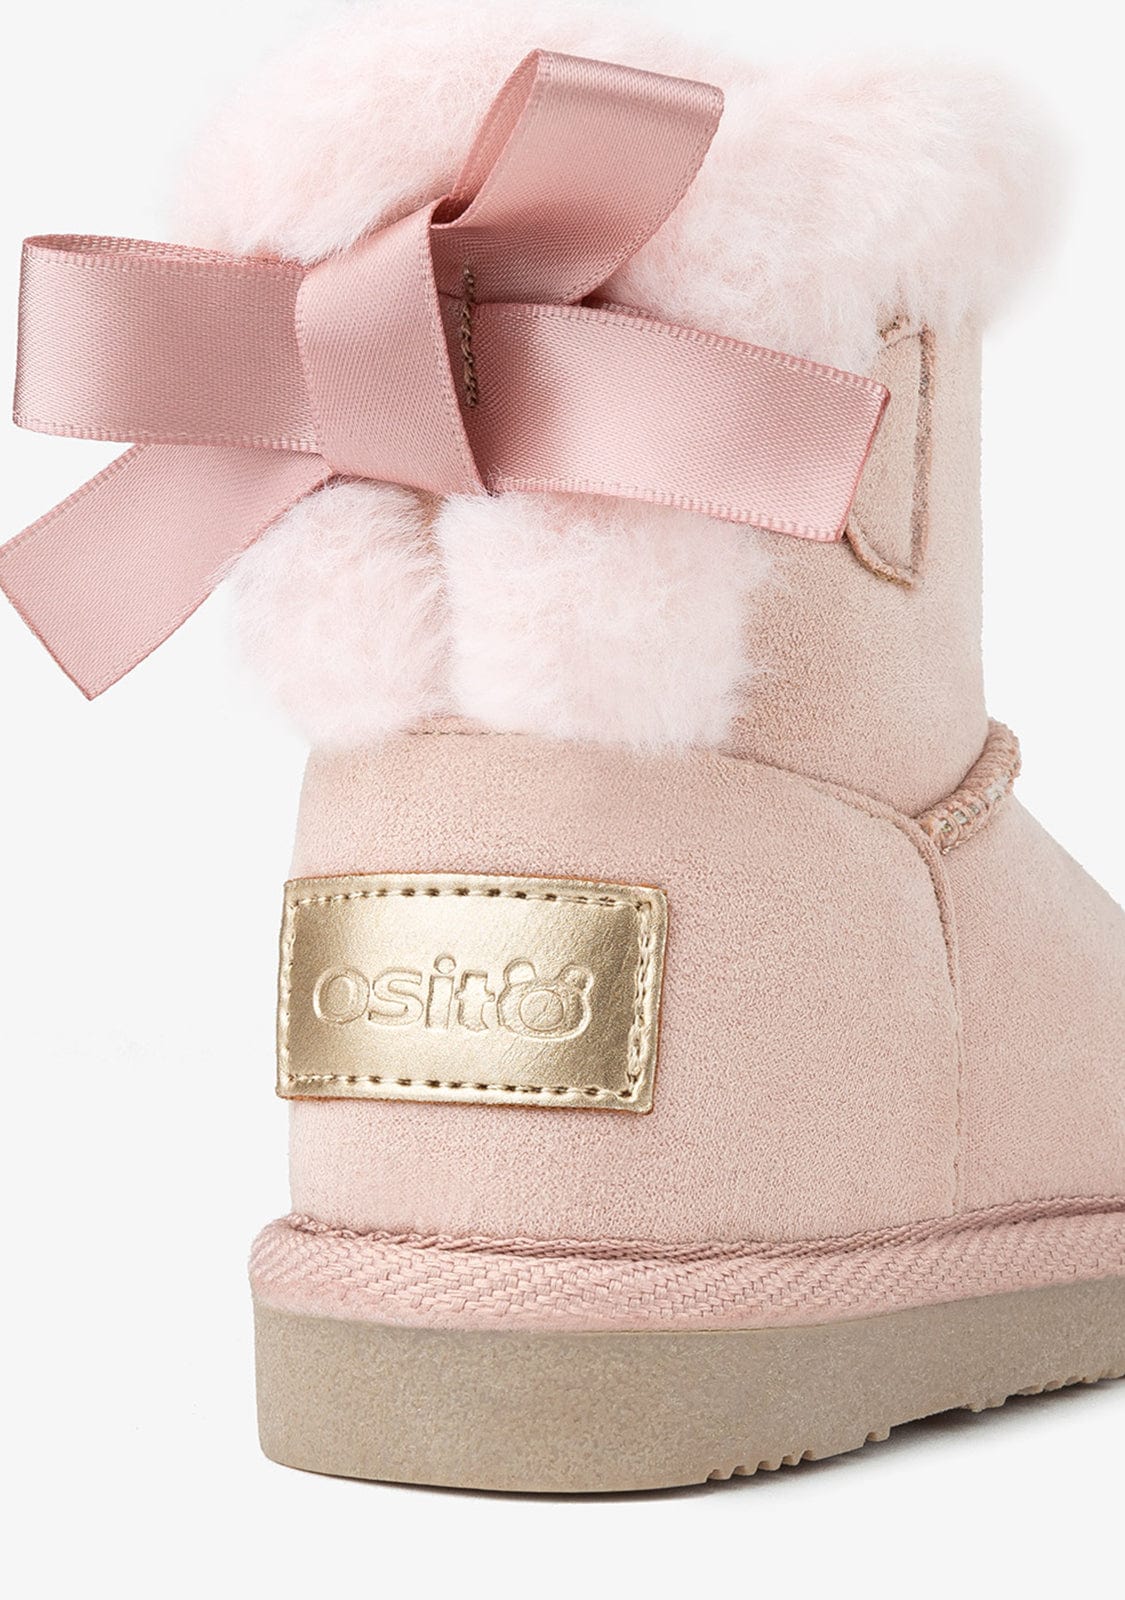 OSITO Shoes Baby's Pink Bow Water Repellent Australian Boots